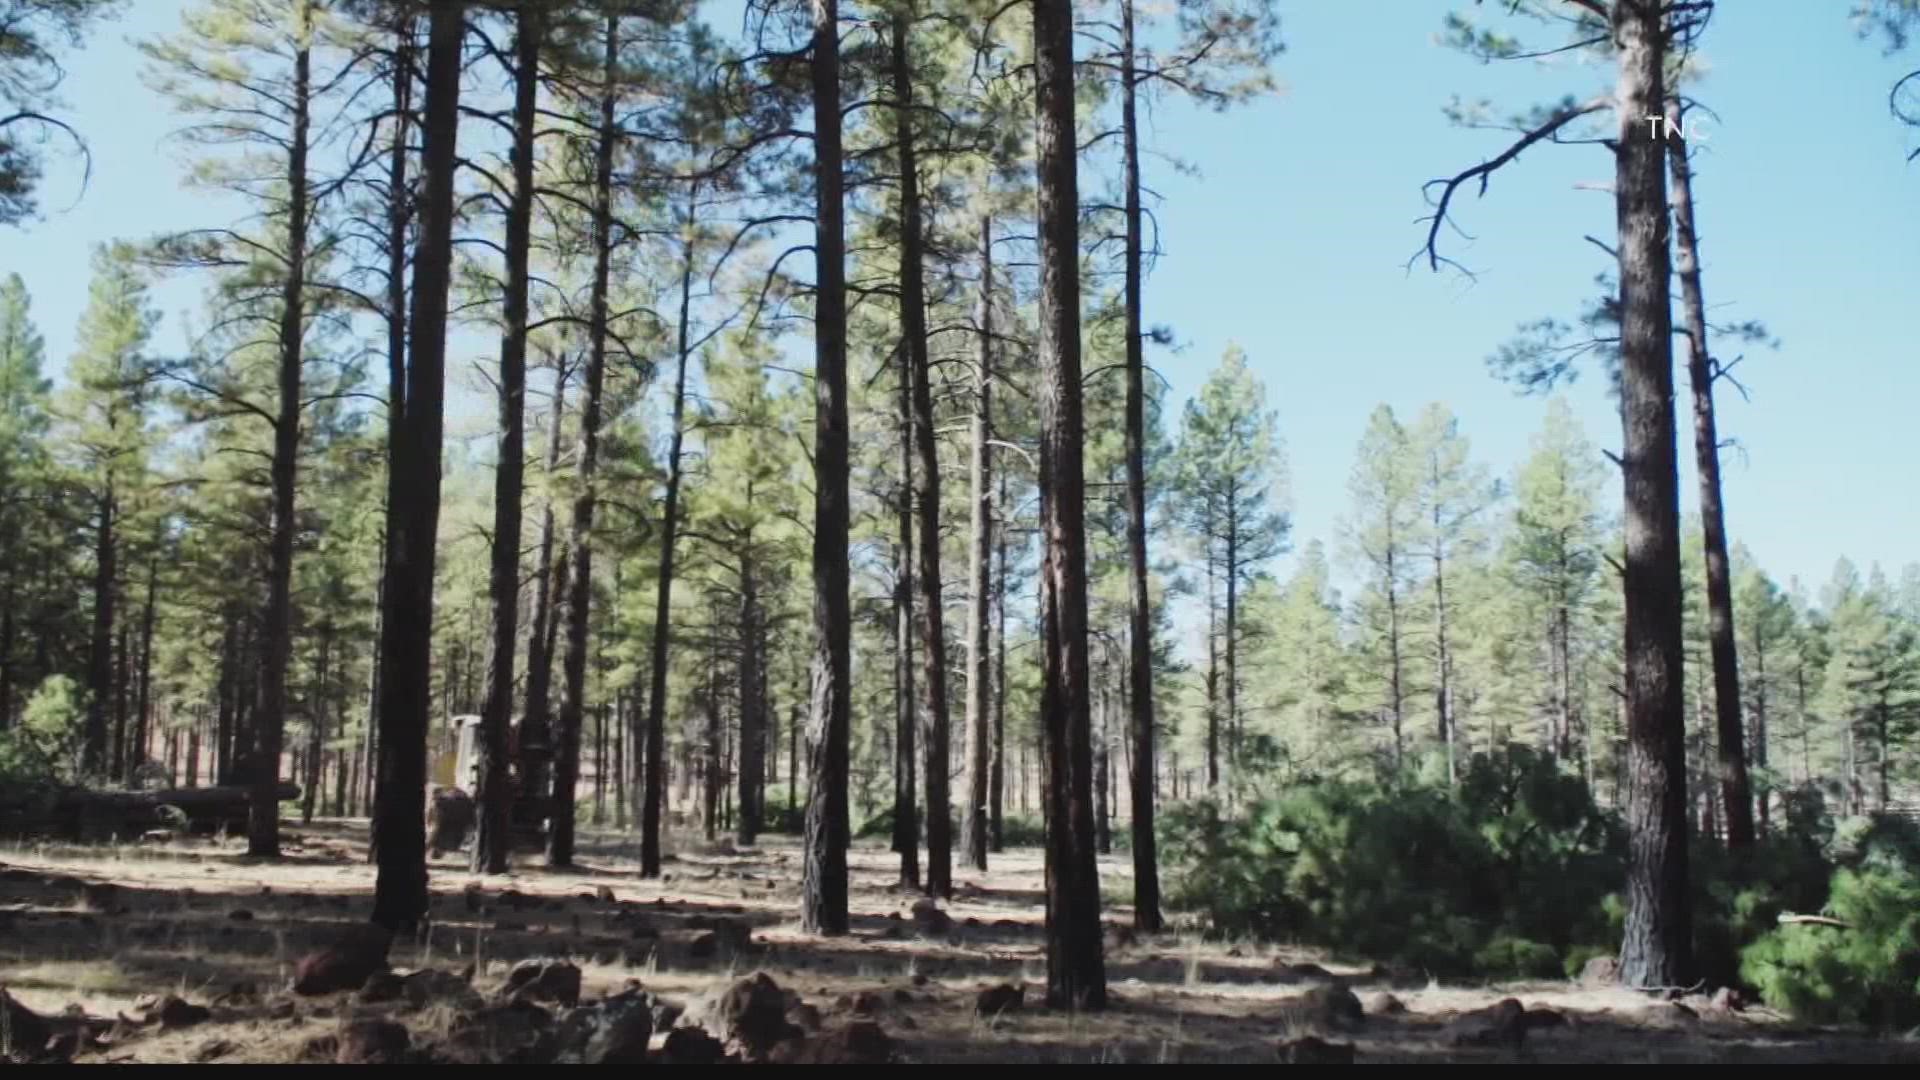 A new initiative is looking to help restore forests impacted by devastating wildfires. Jen Wahl has more on how Arizona forests will be impacted.